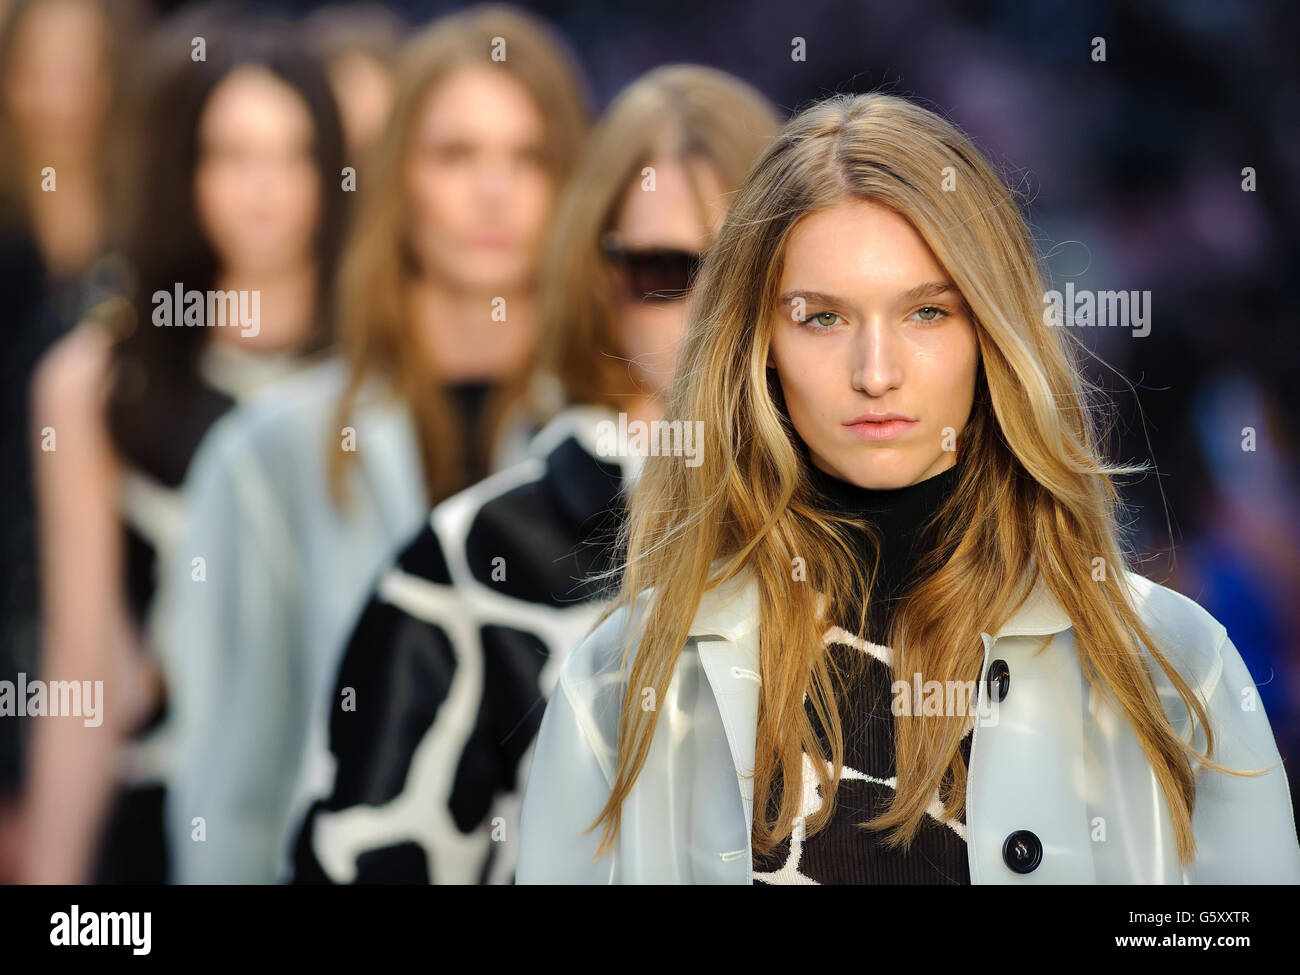 Models on the catwalk during the Burberry Prorsum catwalk show on day four of London Fashion Week, at Kensington Gardens, Kensington Gore, London. Stock Photo